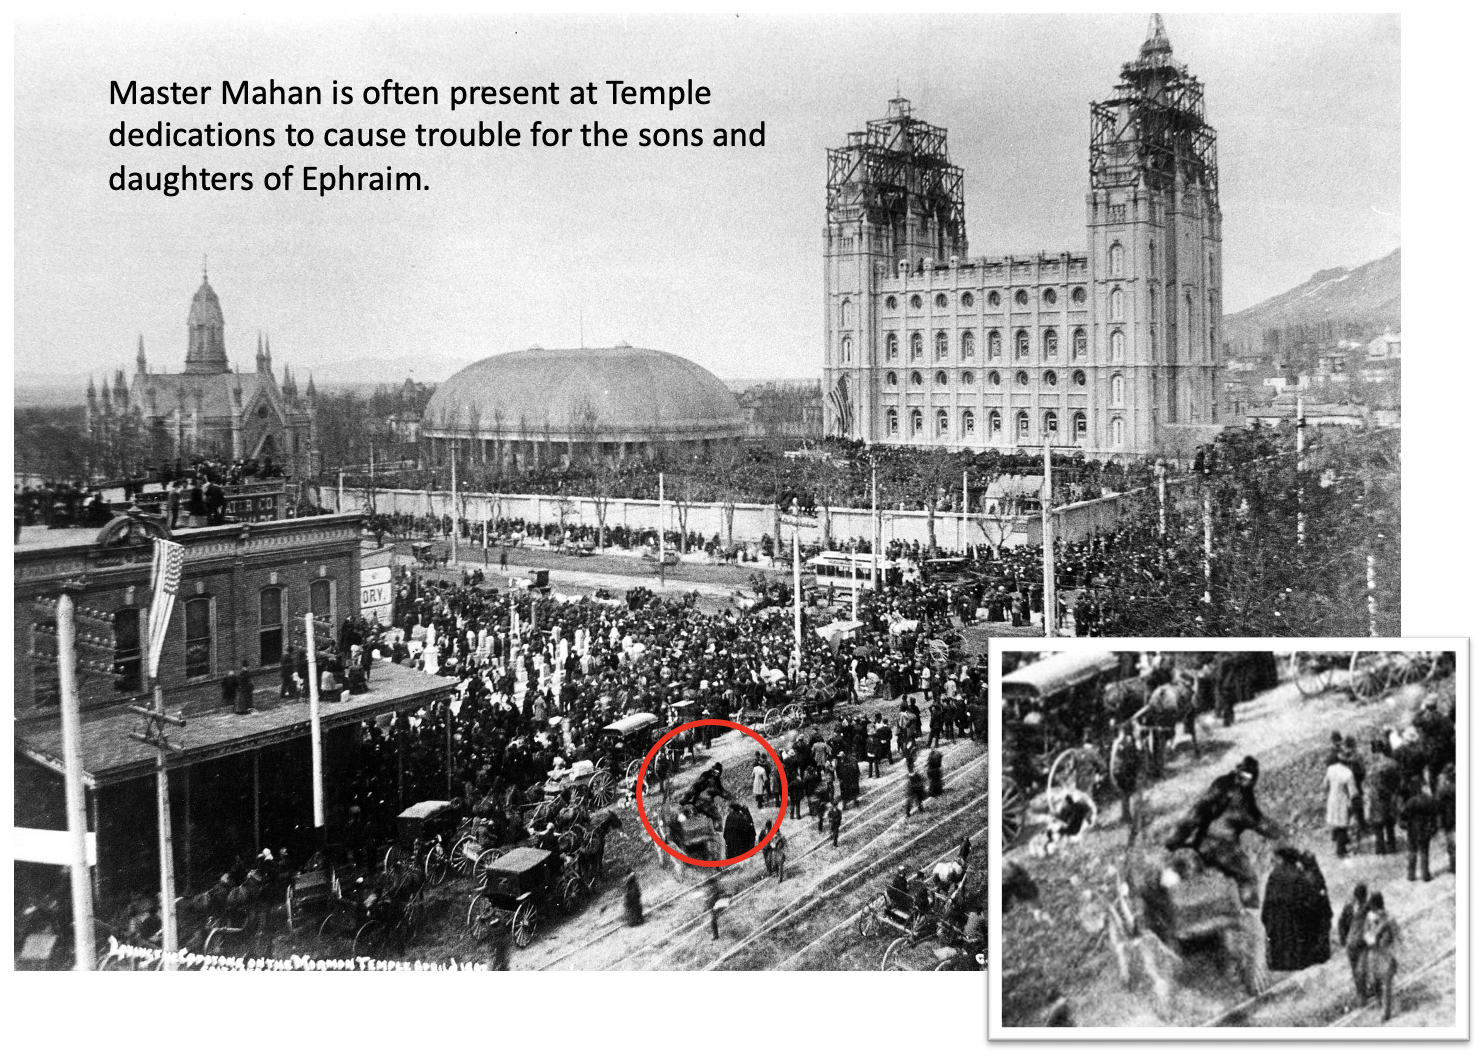 1893 Salt Lake Temple dedication photograph with Bigfoot photoshopped into the crowd.